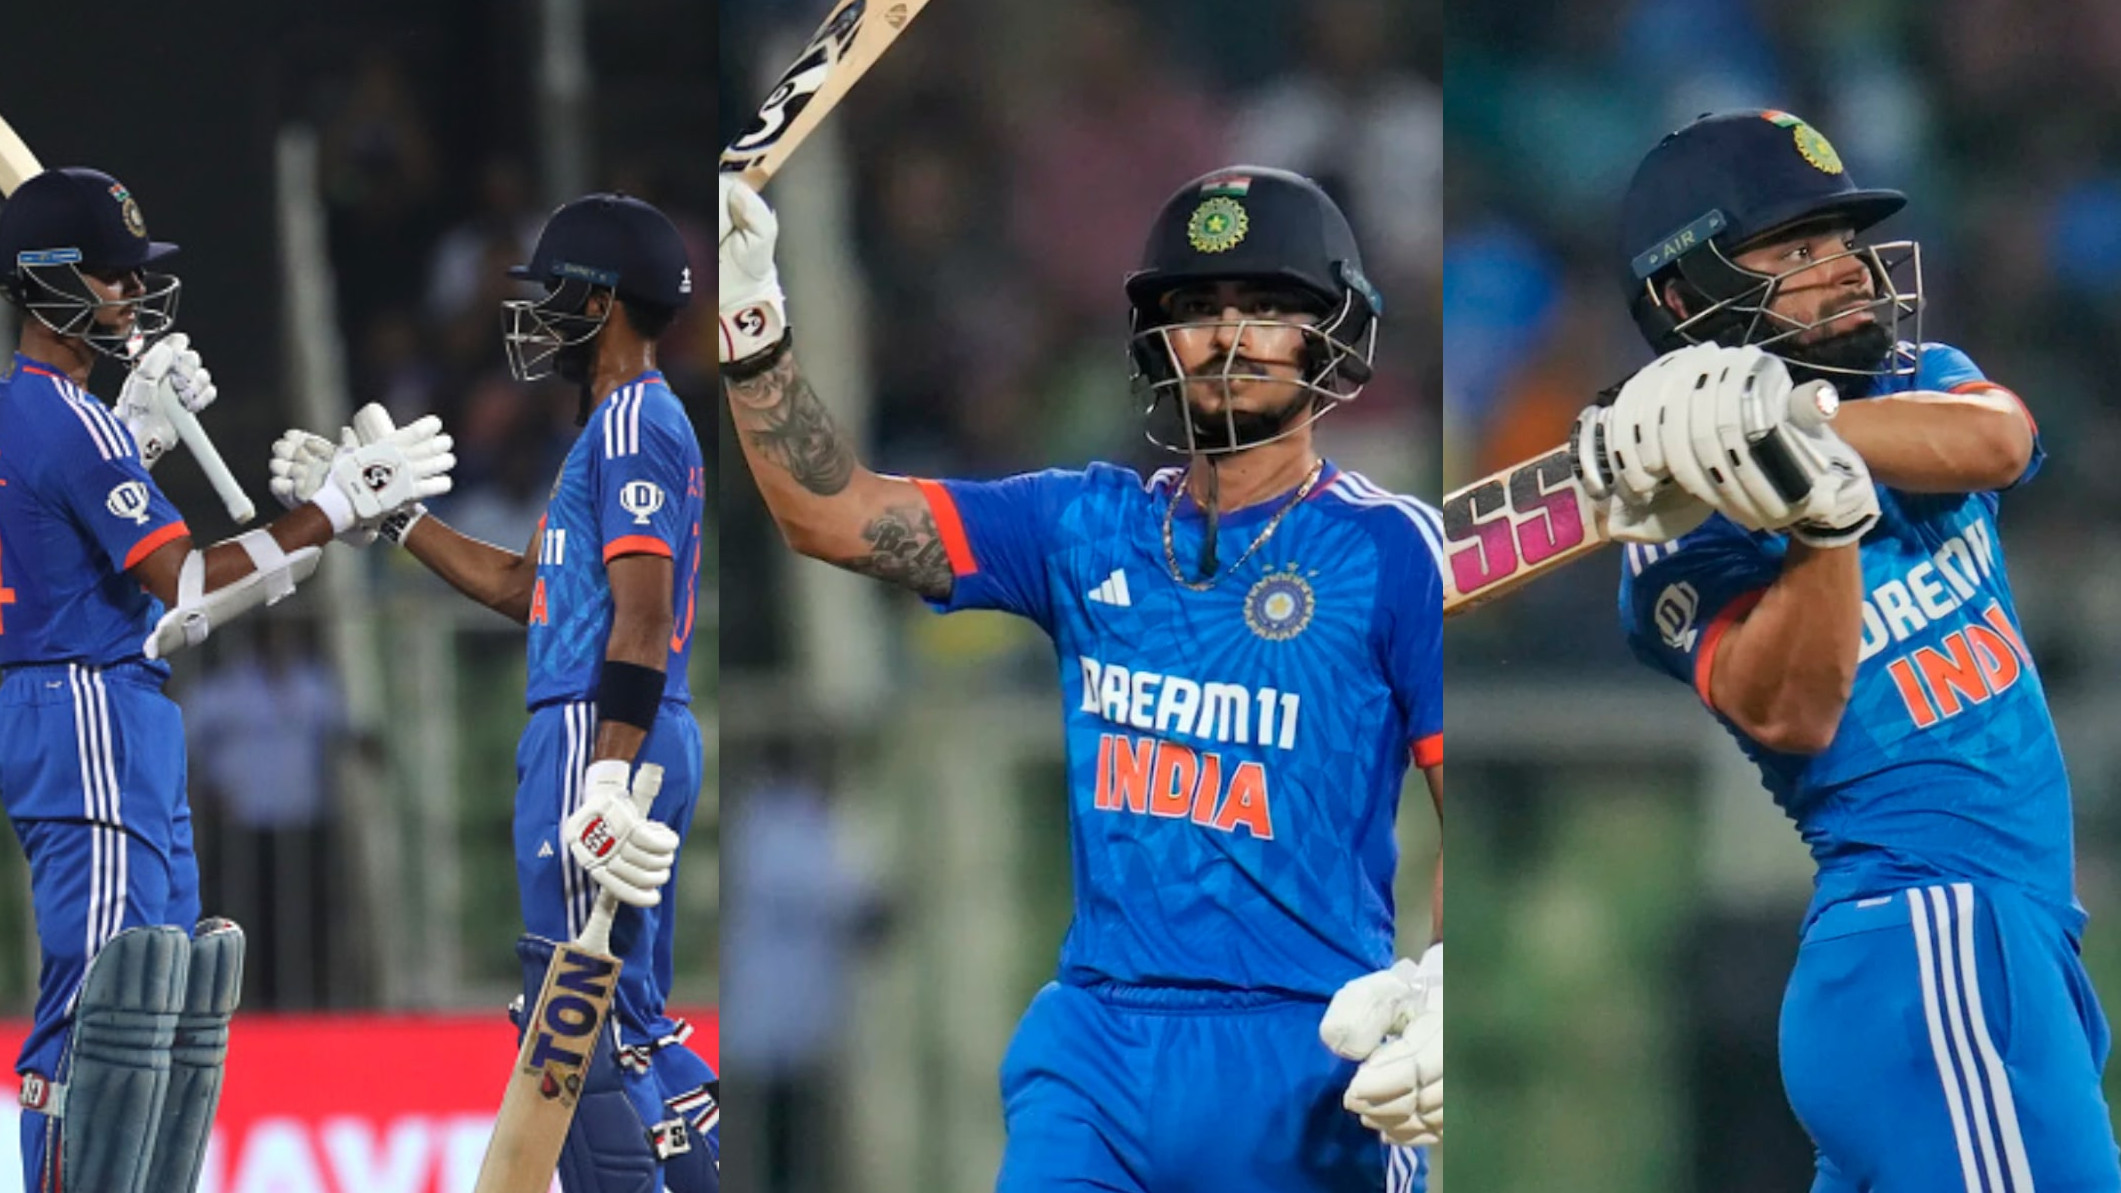 IND v AUS 2023: Batting might helps India defeat Australia by 44 runs to go 2-0 up in T20I series